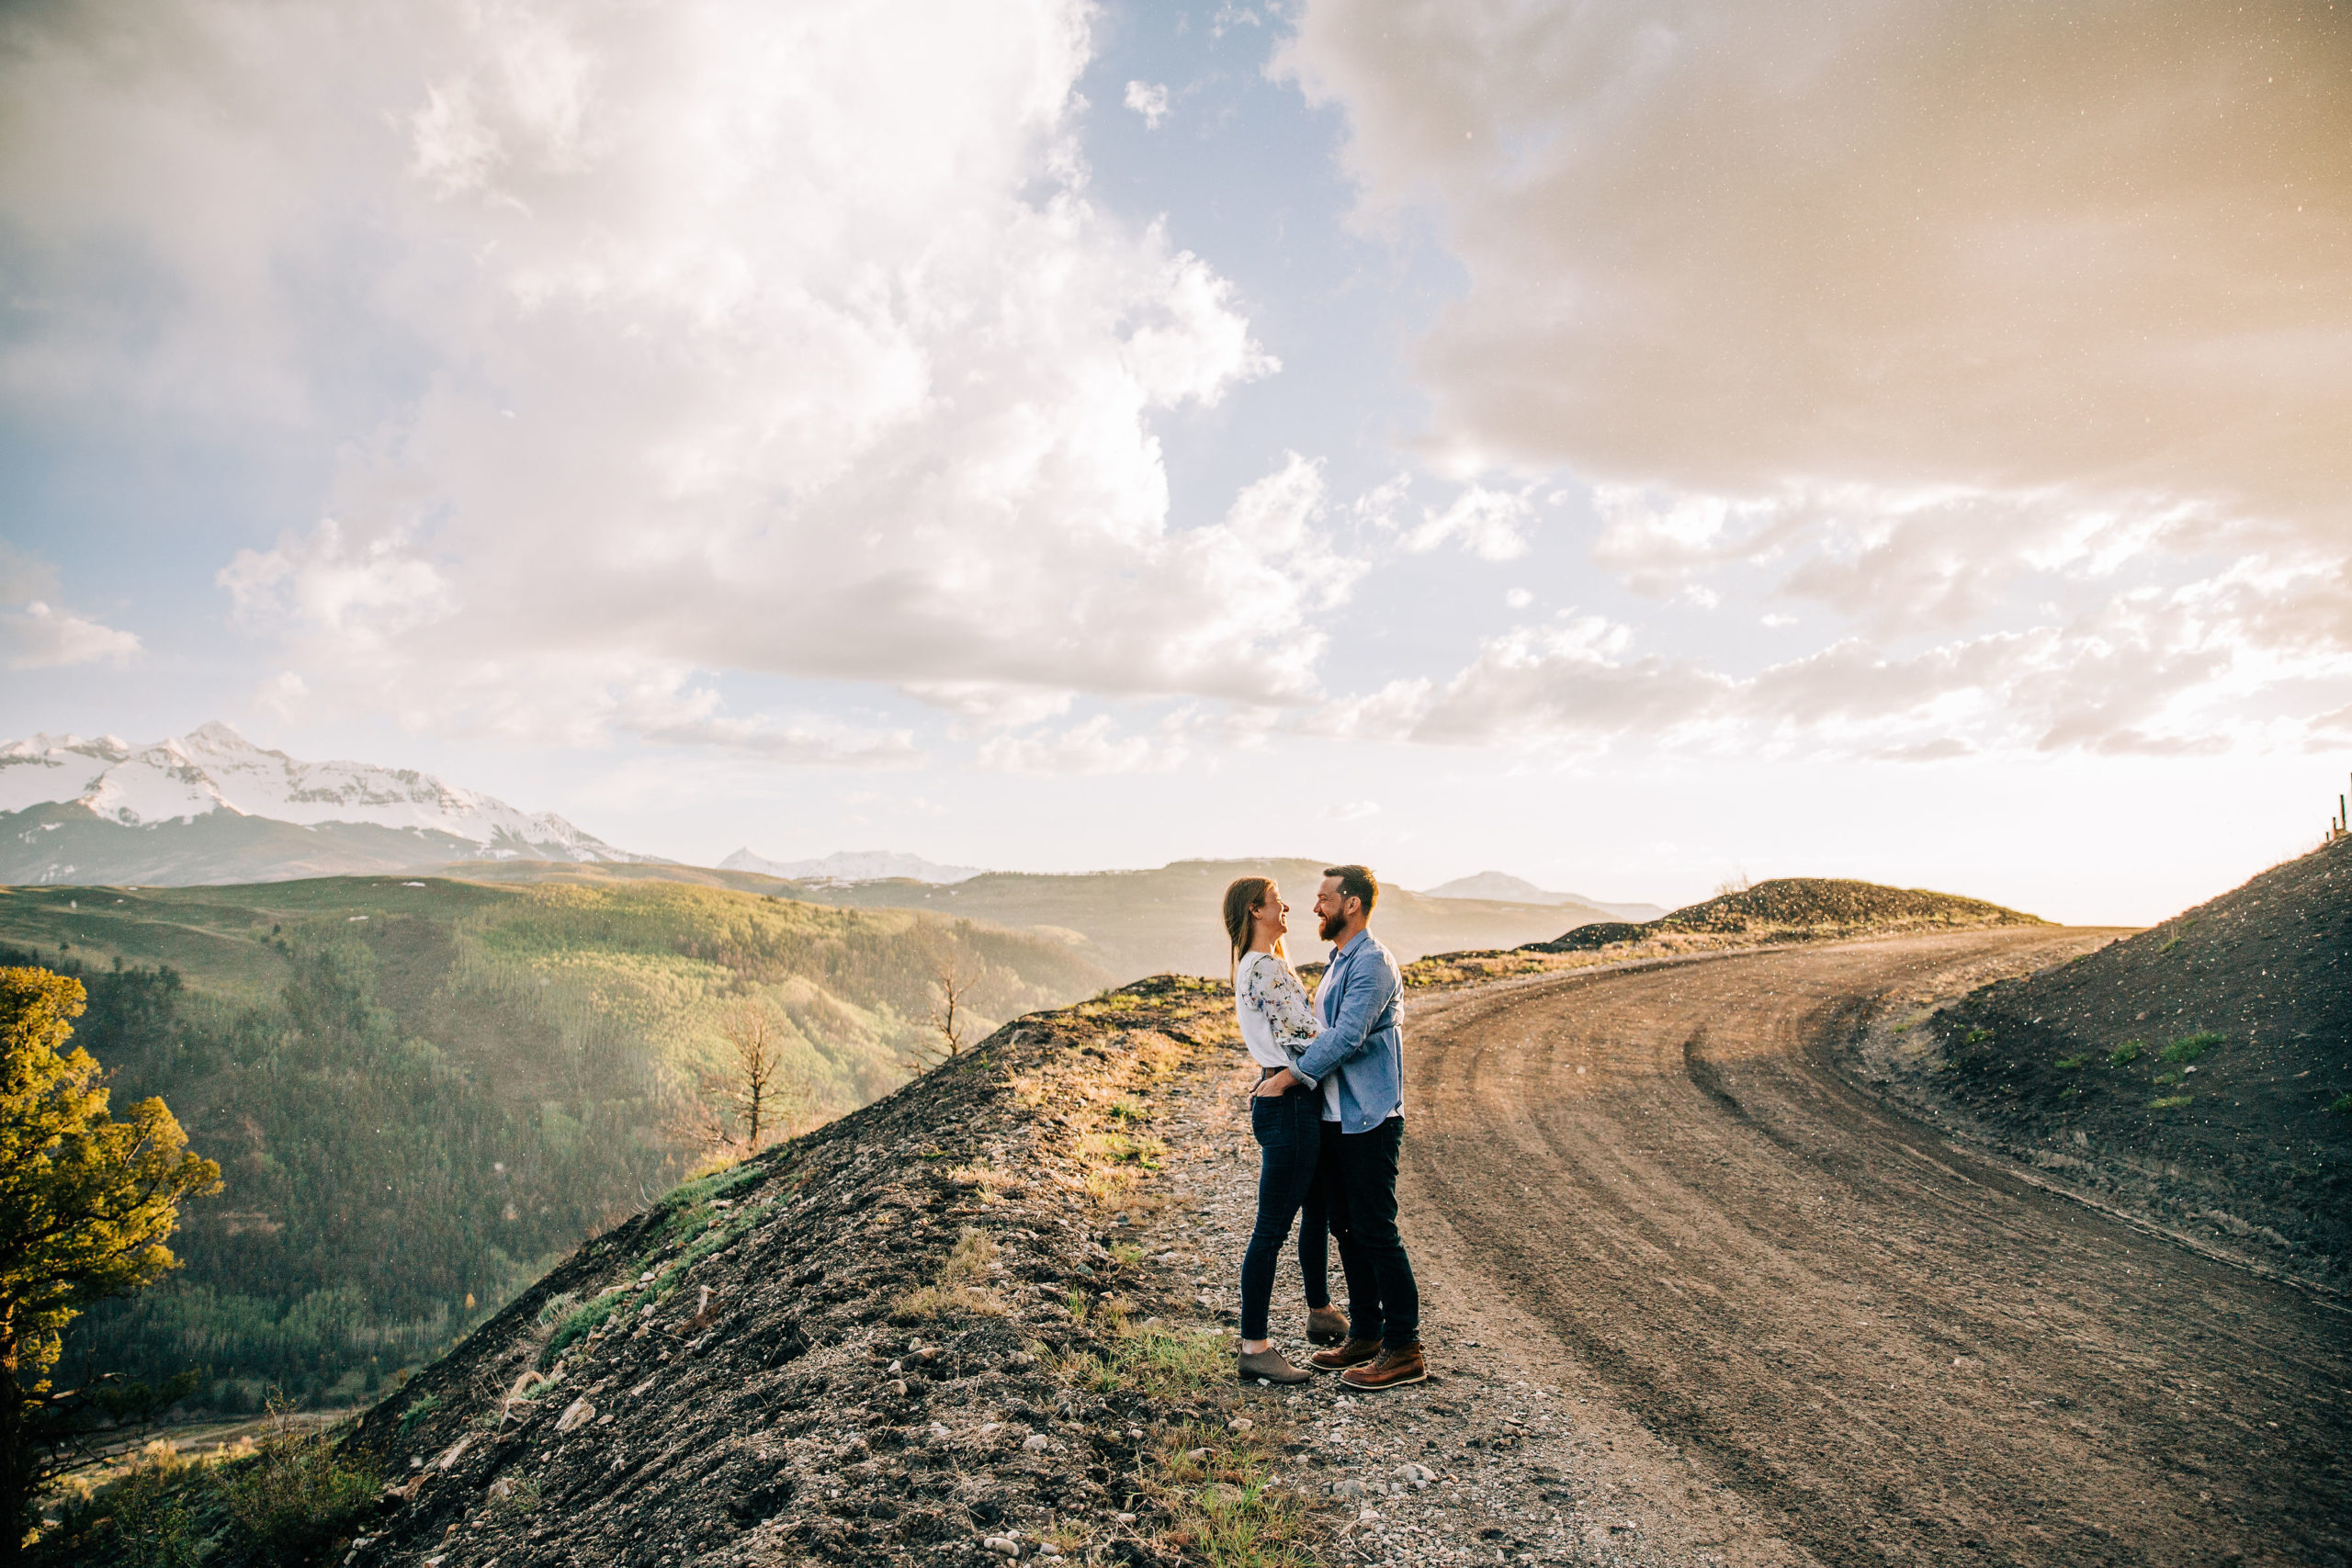 Engagement Photo in the Mountains of Telluride Colorado by Abie Livesay Photography